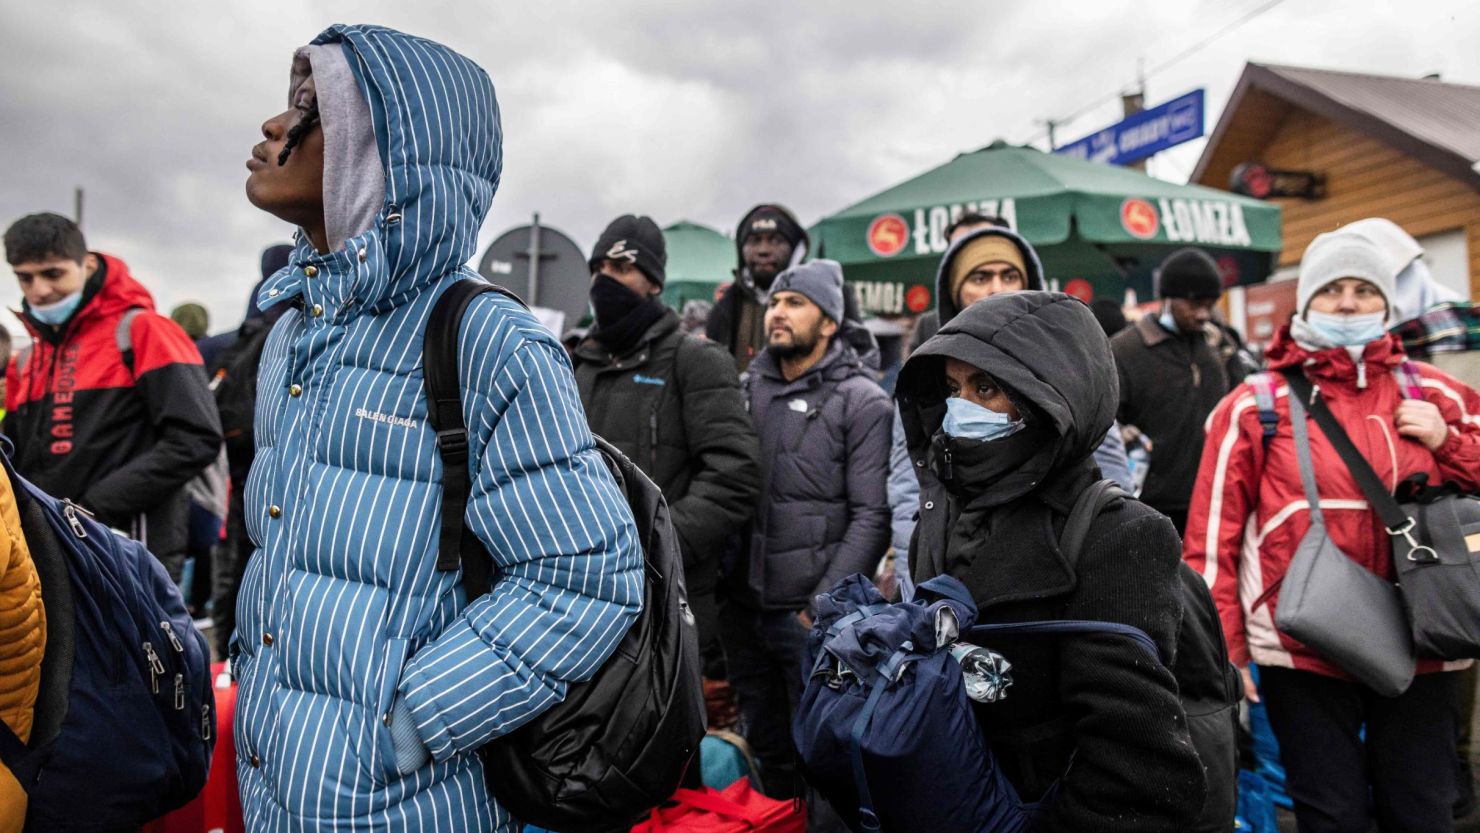 Refugees from many different countries - from Africa, Middle East and India - mostly students of Ukrainian universities are seen at the Medyka pedestrian border crossing fleeing the conflict in Ukraine, in eastern Poland on February 27, 2022. 